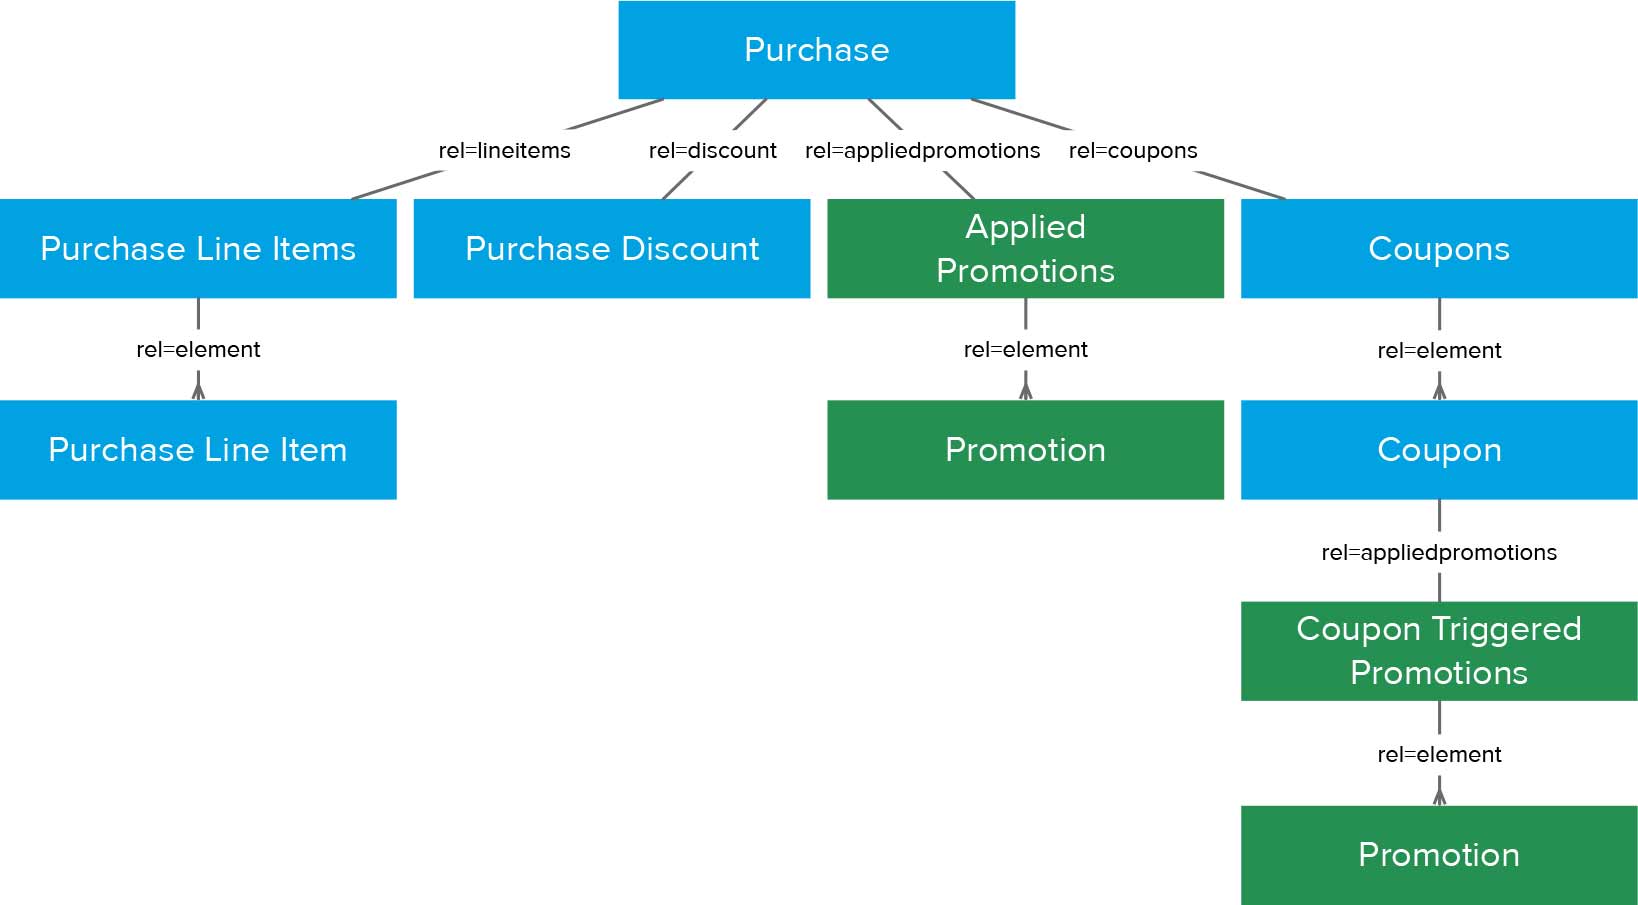 Pricing and promotion resources linked to purchases